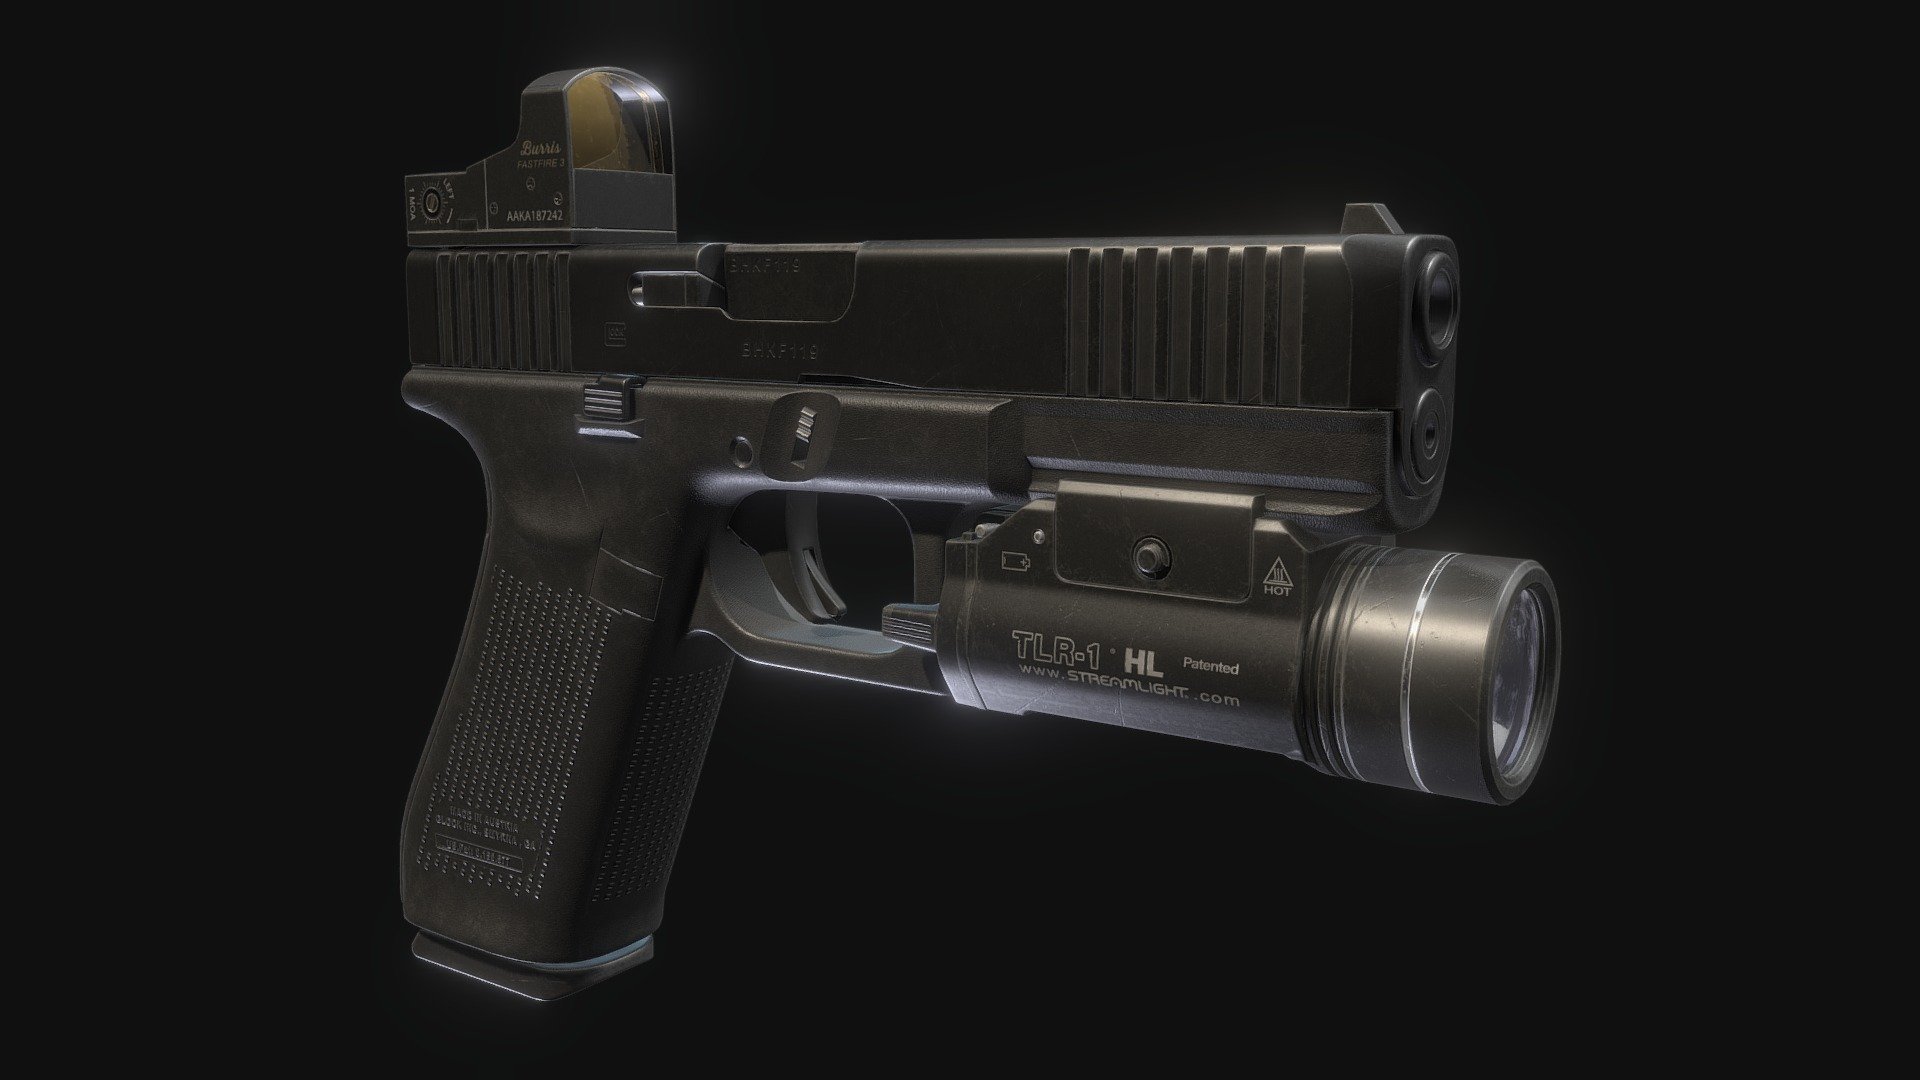 High quality game ready 3d model with PBR textures (Metallic/Roughness workflow).

Total Triangles: 25199 &mdash; ( Gun Tris: 12695 &mdash; Flashlight Tris: 9740 &mdash; RedDot Sight Tris: 2764)

Total Vertices: 13641

Parts are named correctly and separated for rigging and animation.

4 texture sets created for this model with 4k and 2k textures in .png format.

Model is created in 3ds max 2022 and textured in Substance painter 3d model